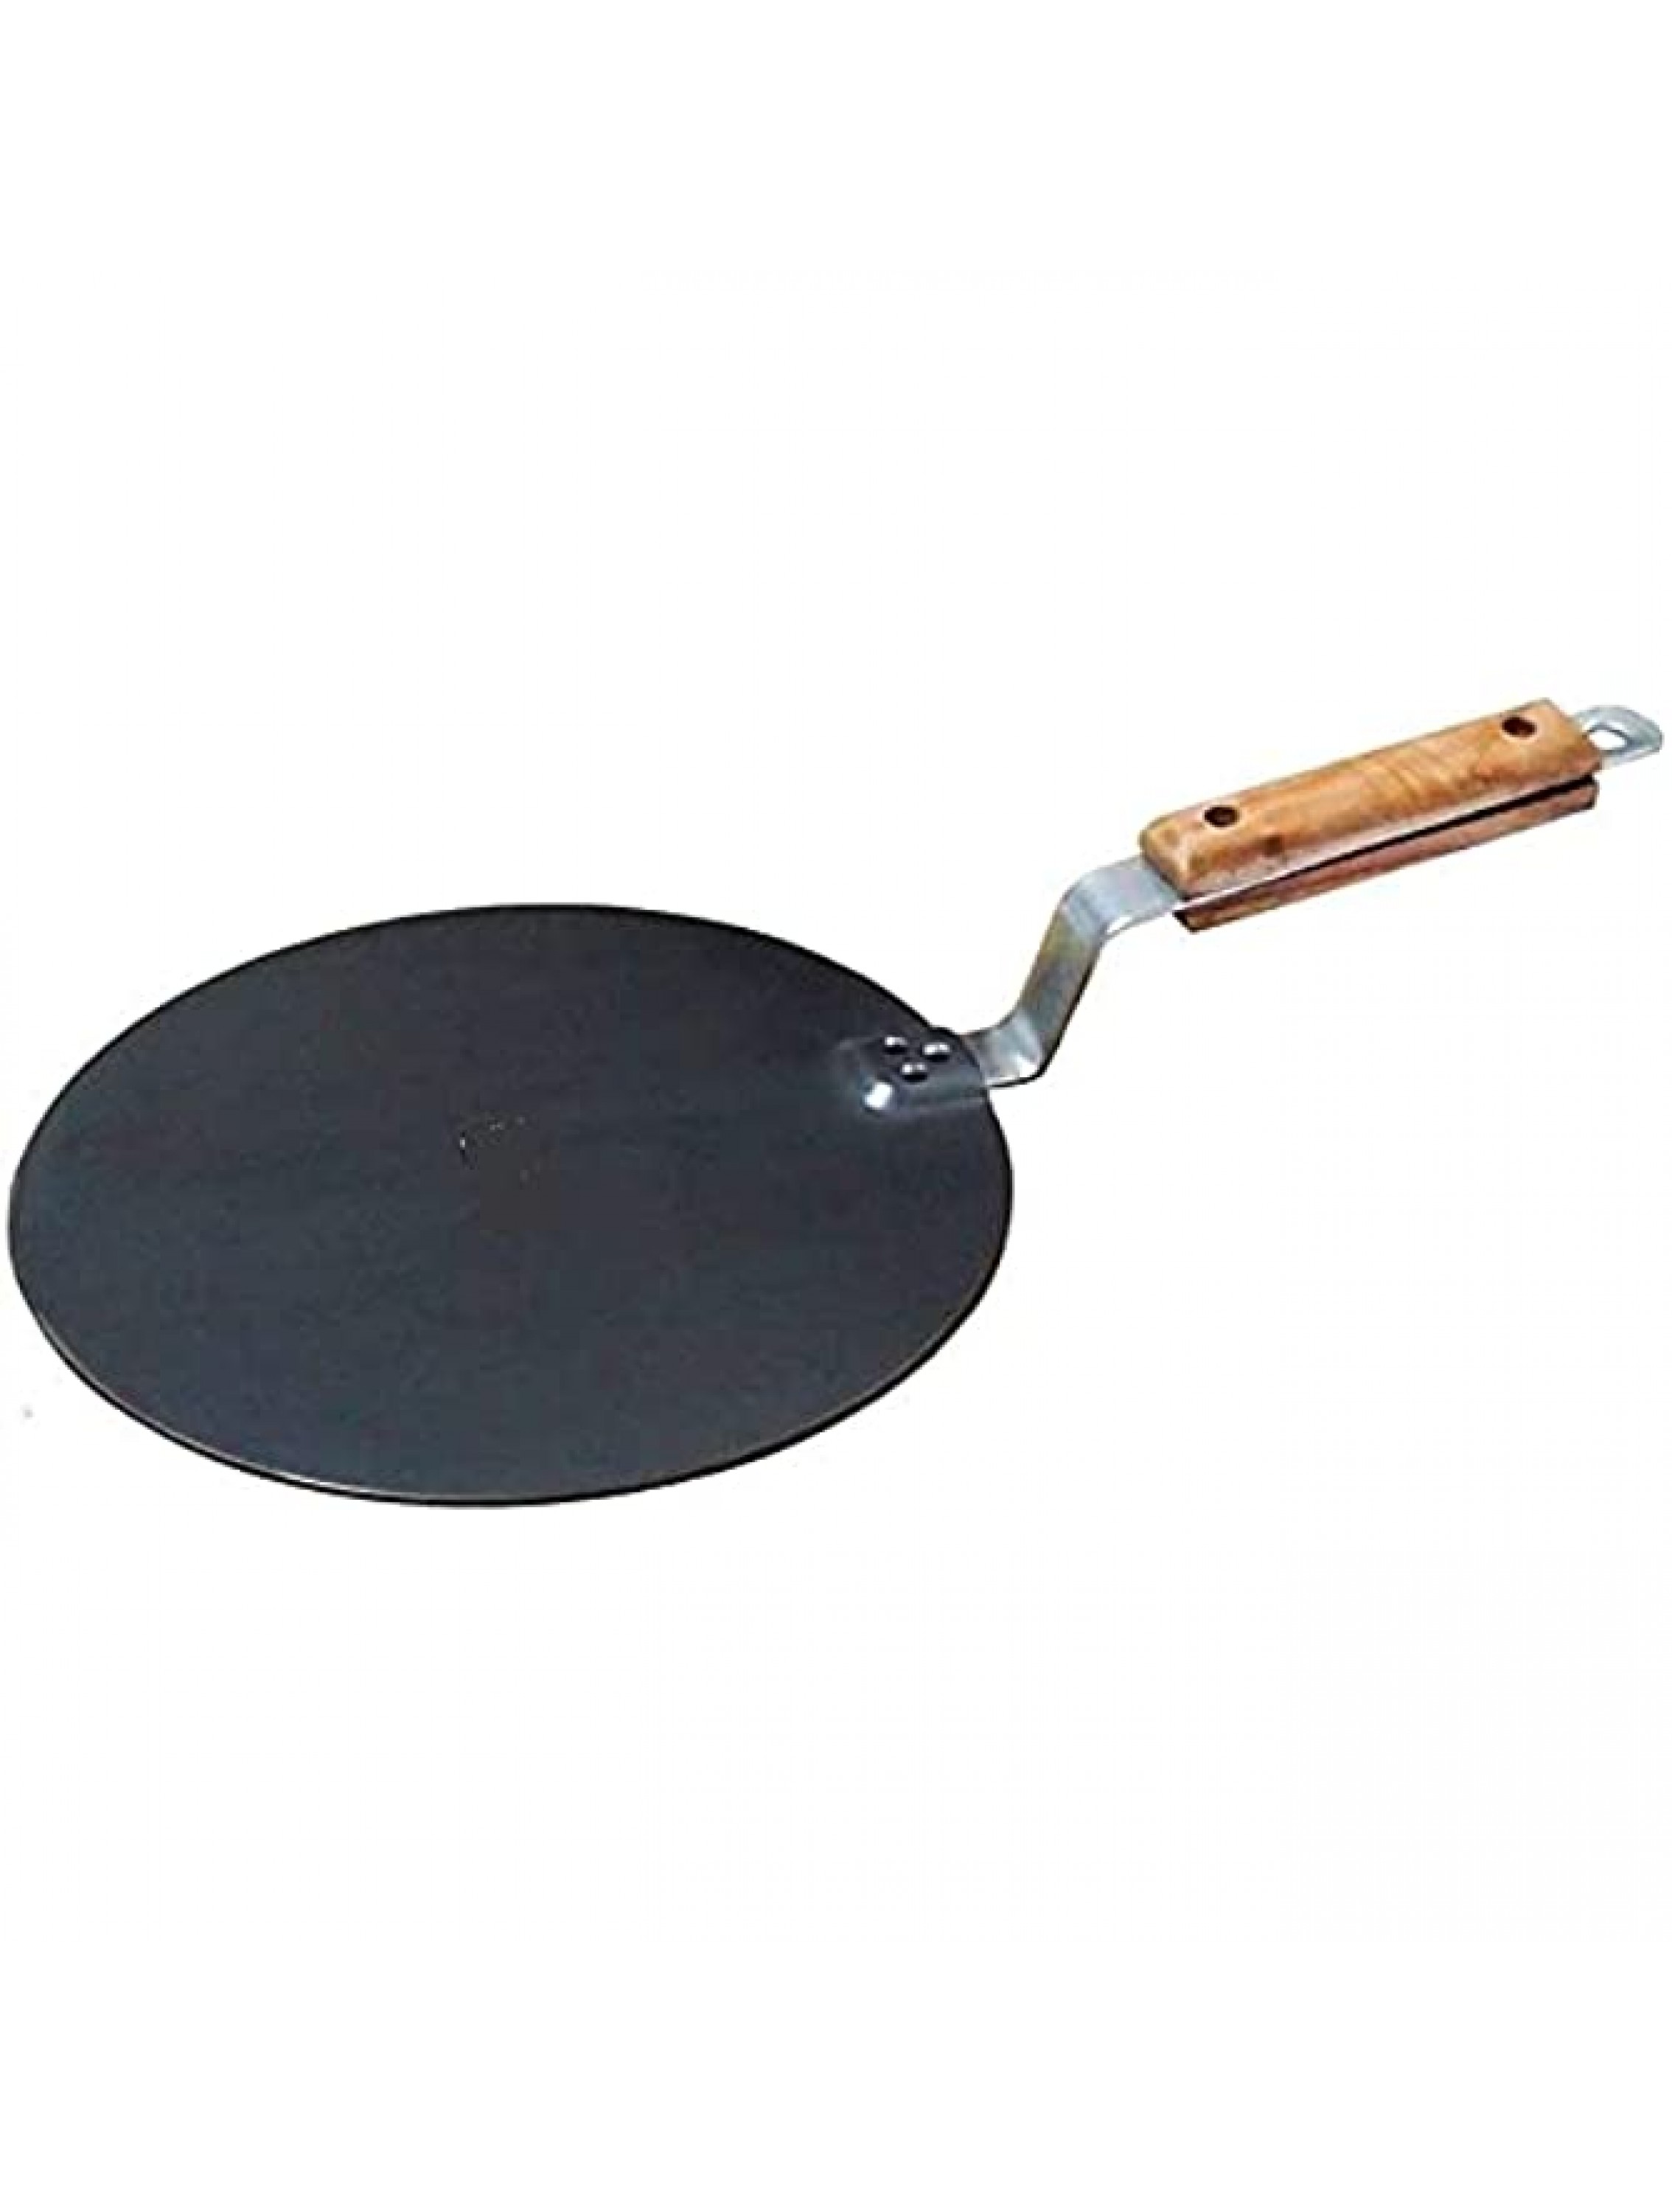 10 Flat Iron Tava for Dosa Making Roti Making with Handle India Style Cooking Pan - BIY1ZL3PF